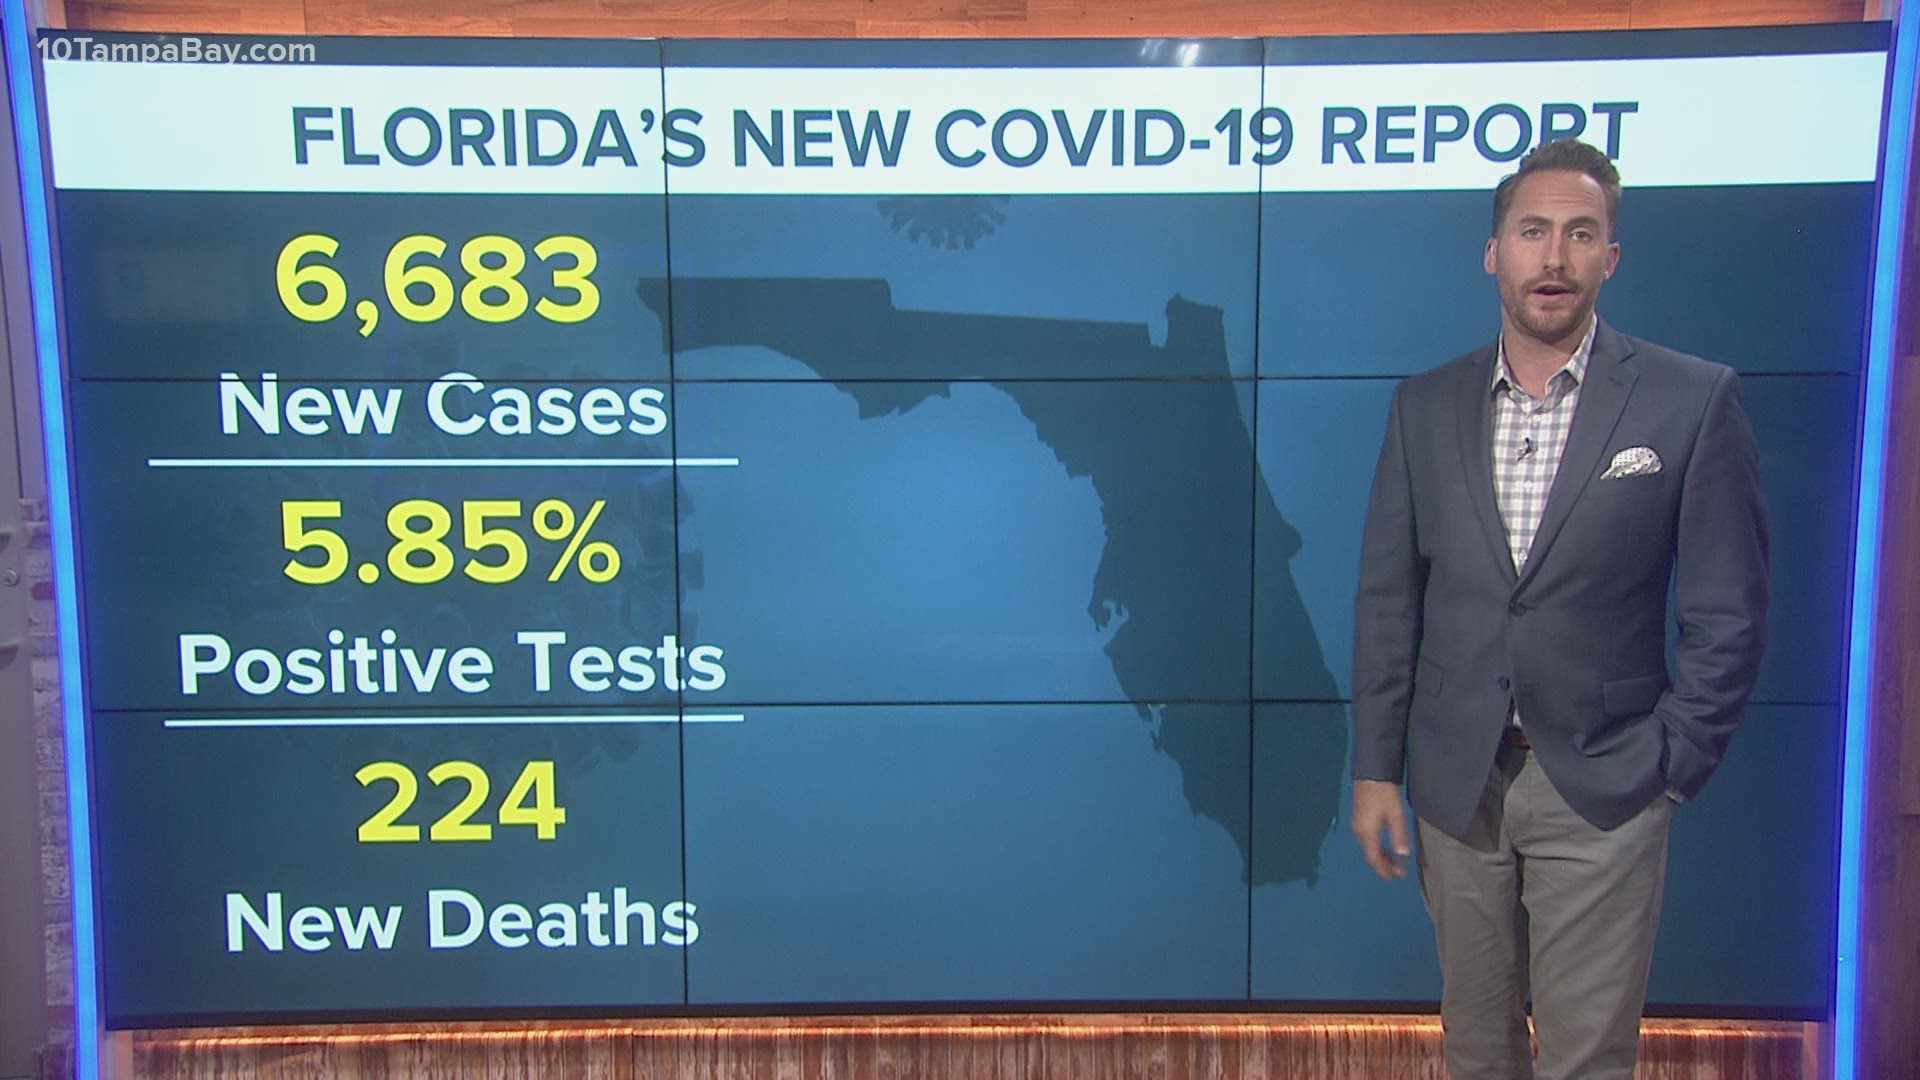 A total of 1,856,427 people in Florida have tested positive for coronavirus since the pandemic began